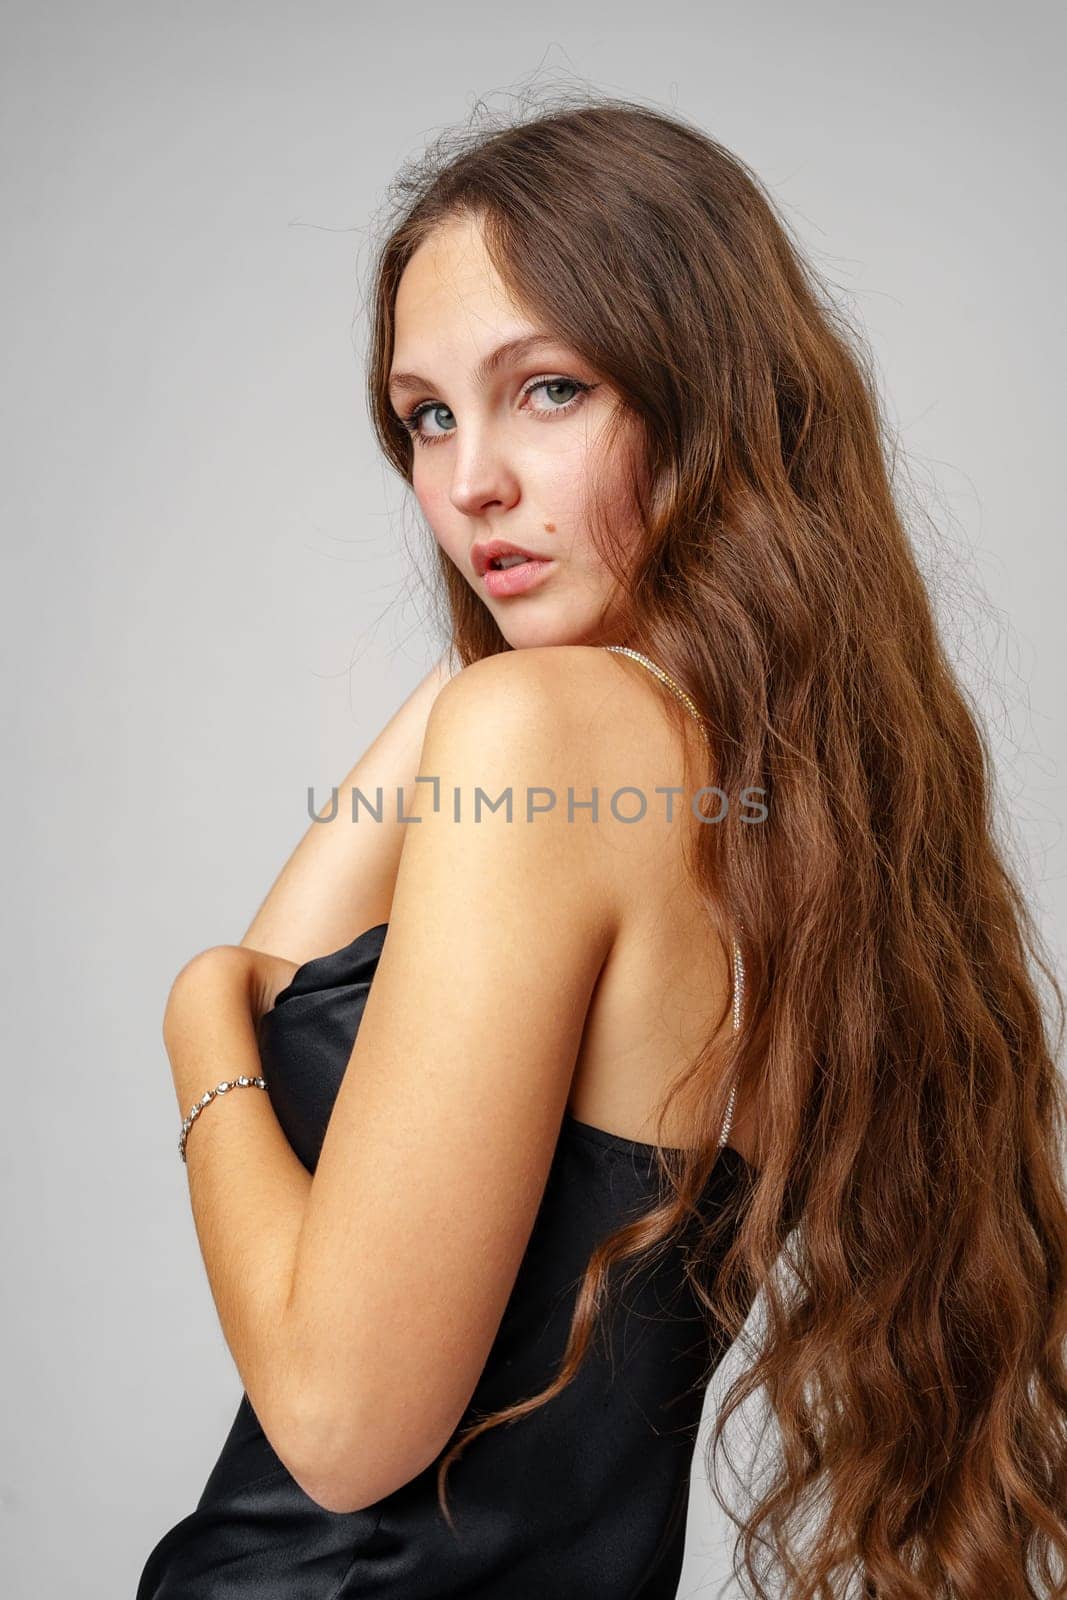 A young woman with long, flowing brown hair gazes over her shoulder with striking blue eyes. She is wearing a strapless black dress, showcasing her bare shoulders, accented by a simple bracelet on her wrist. Her confident yet graceful posture adds to her elegant appearance.